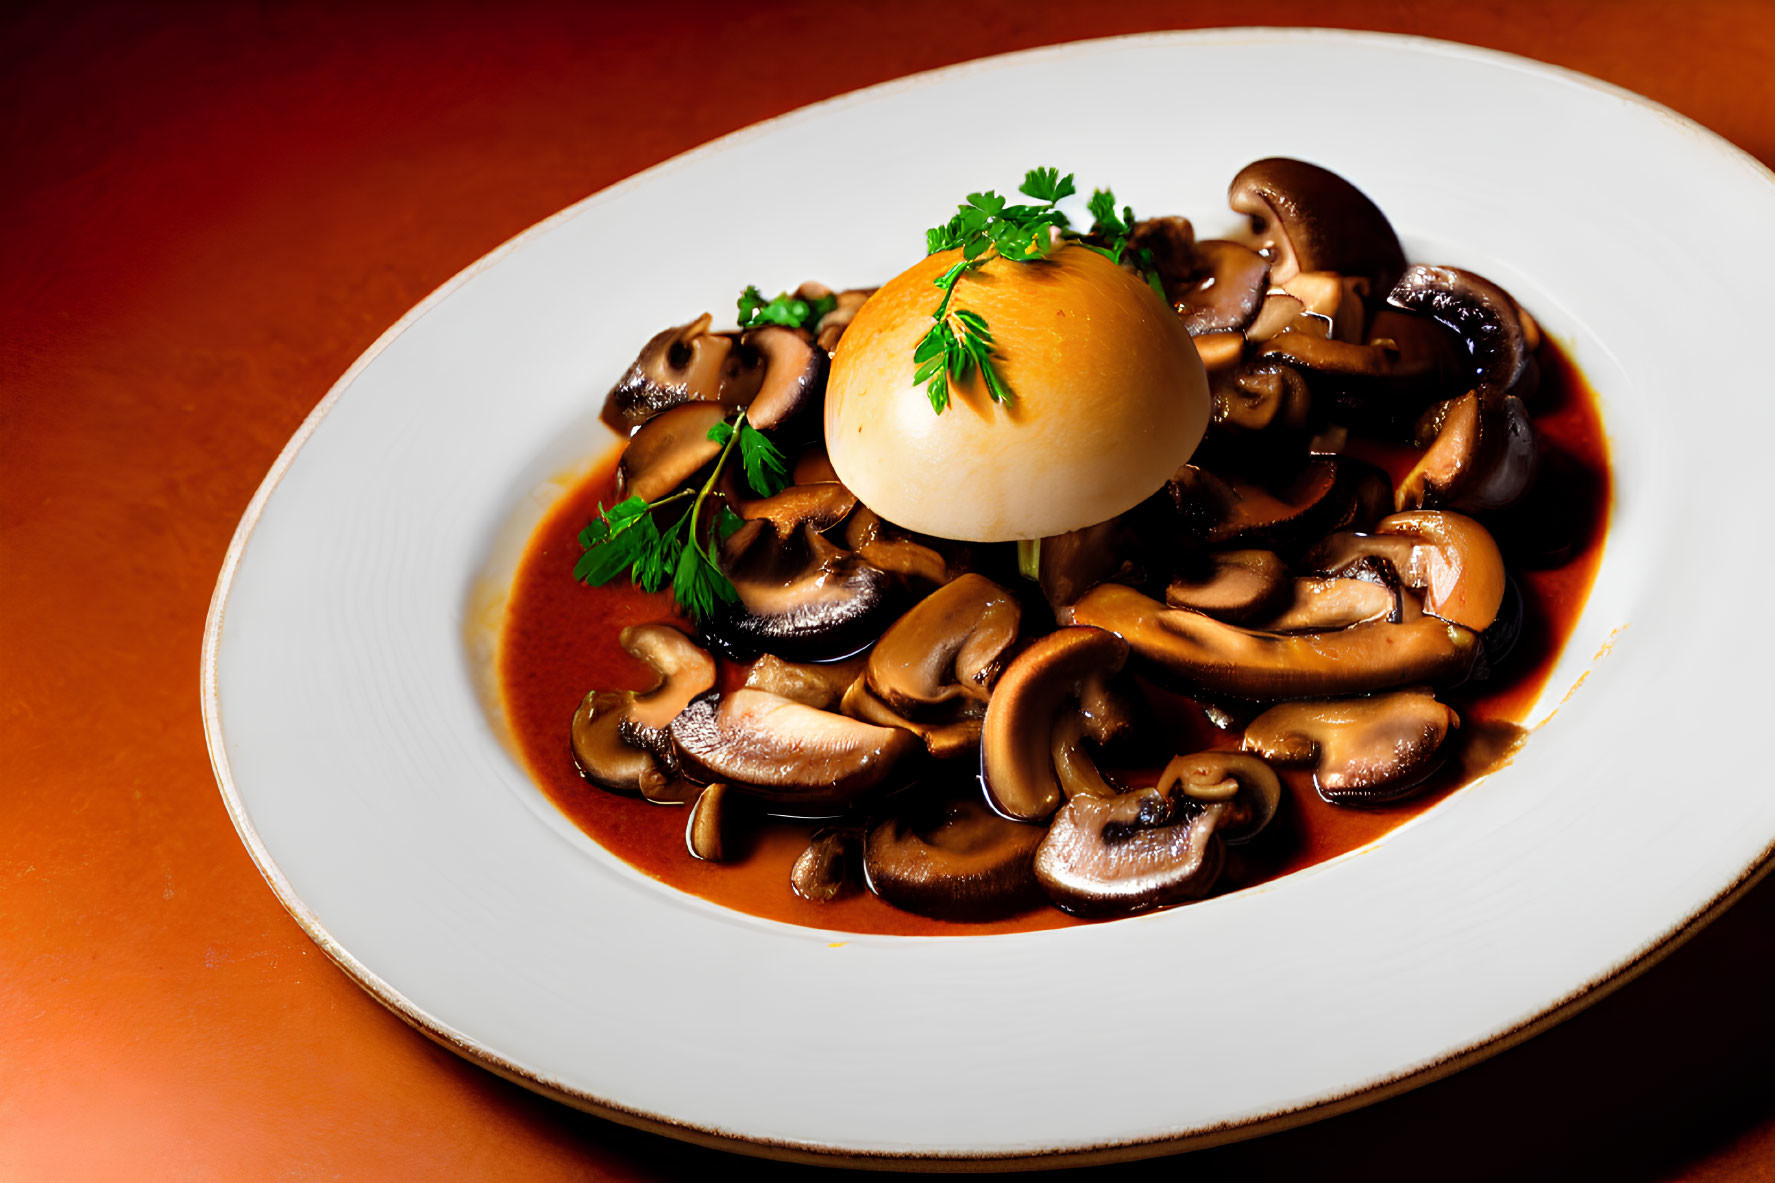 Whole mushroom dish with parsley and sliced mushrooms in rich brown sauce on white plate